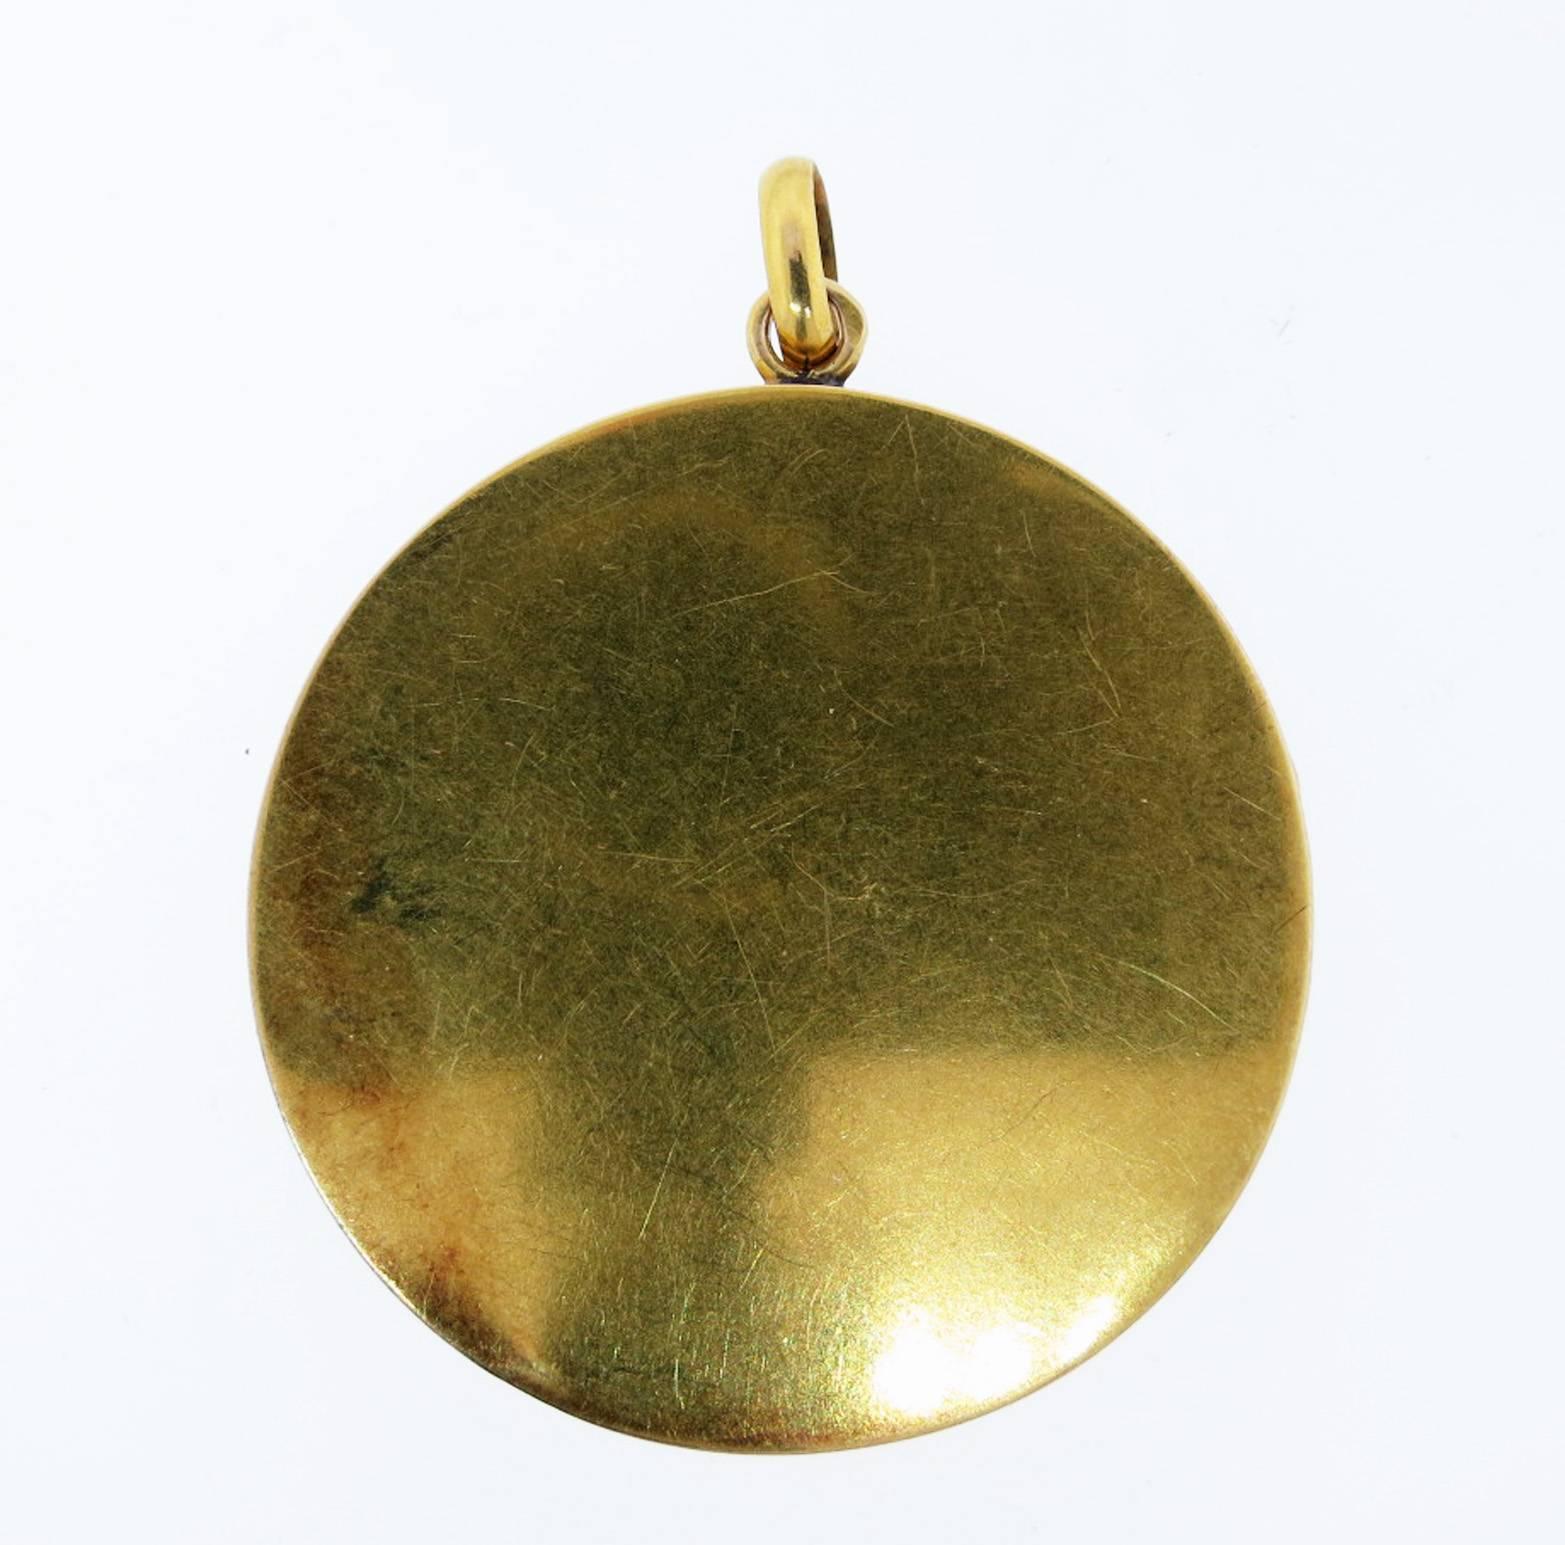 Wonderful and historic French 18kt. yellow gold locket commemorating the much celebrated arrival in Paris of the Wright brothers in 1908. The locket measures approx 1 1/2 inches and is in remarkable condition with diamond accents,  French hallmarks